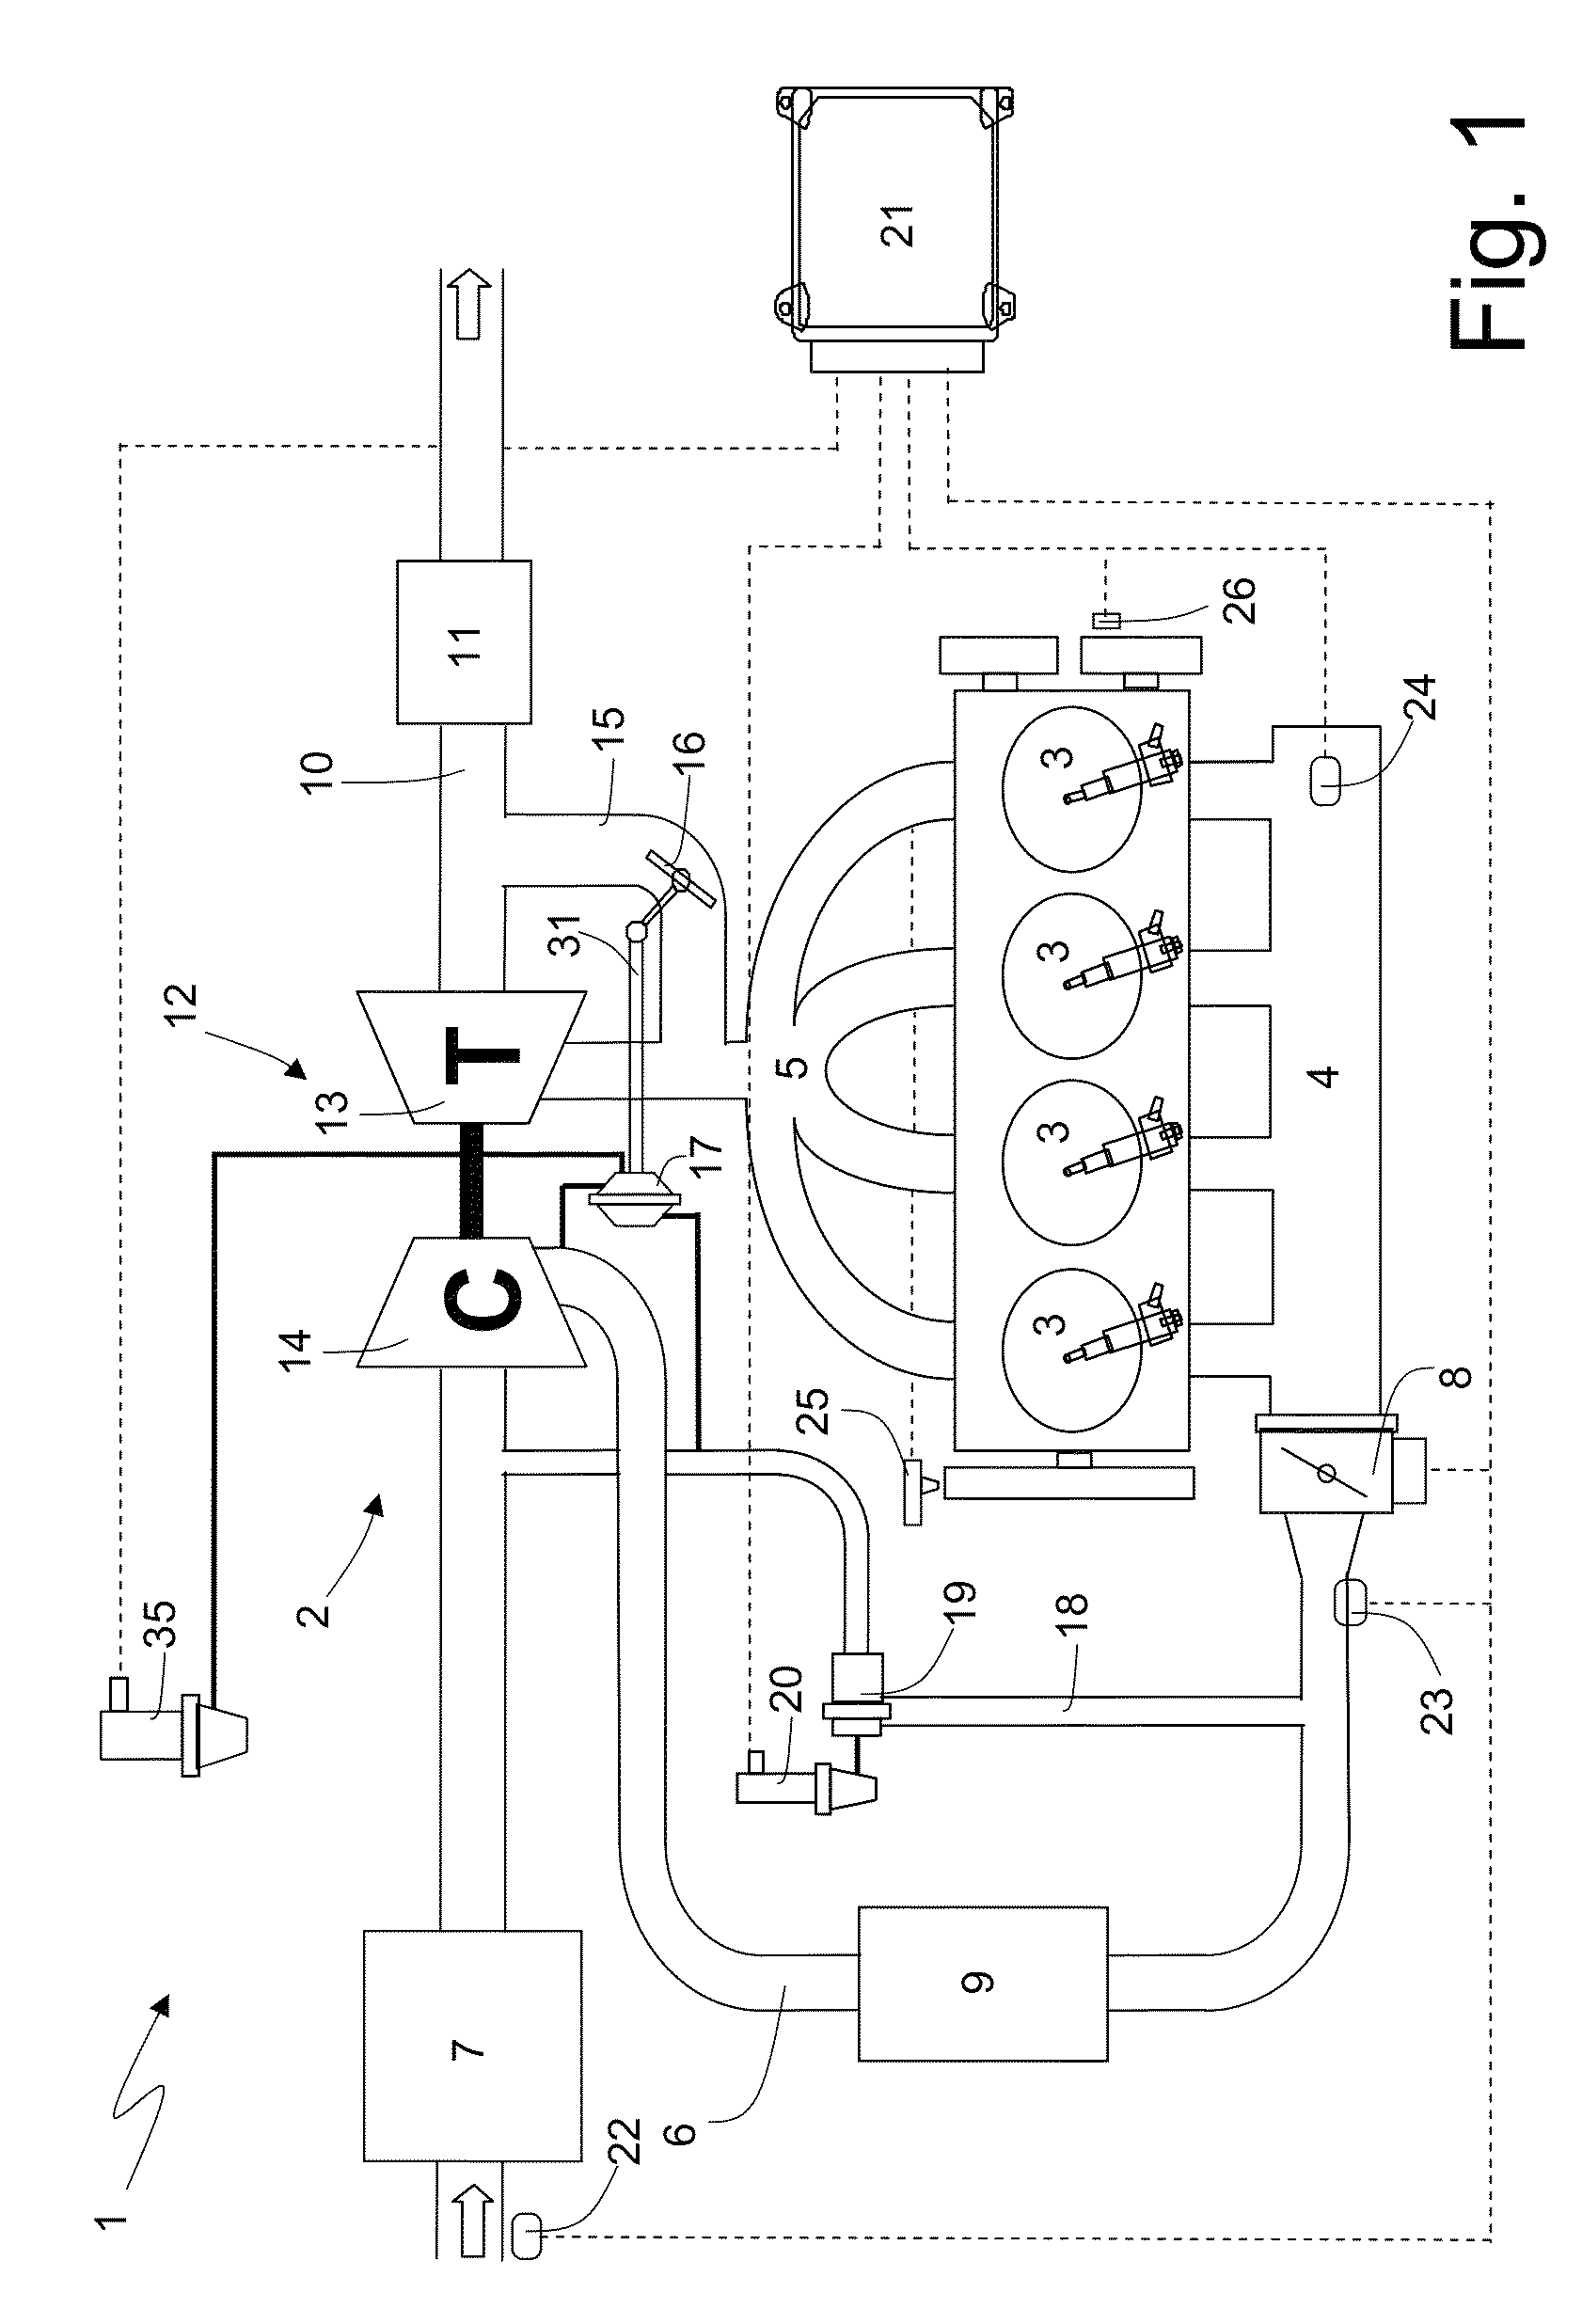 Method for controlling a wastegate in a turbocharged internal combustion engine